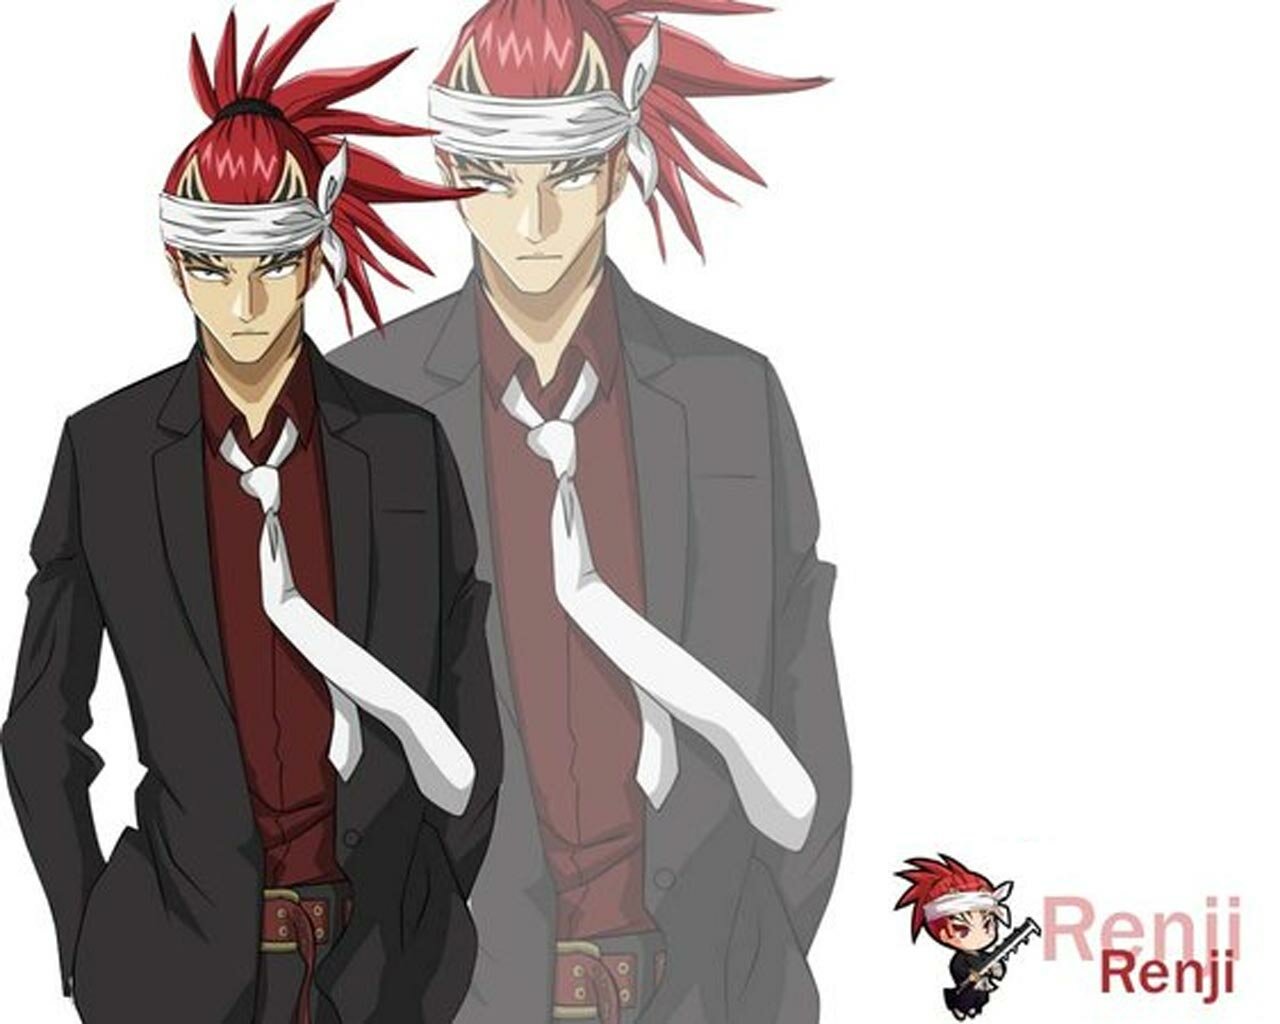 You are viewing the Bleach wallpaper named Renji.